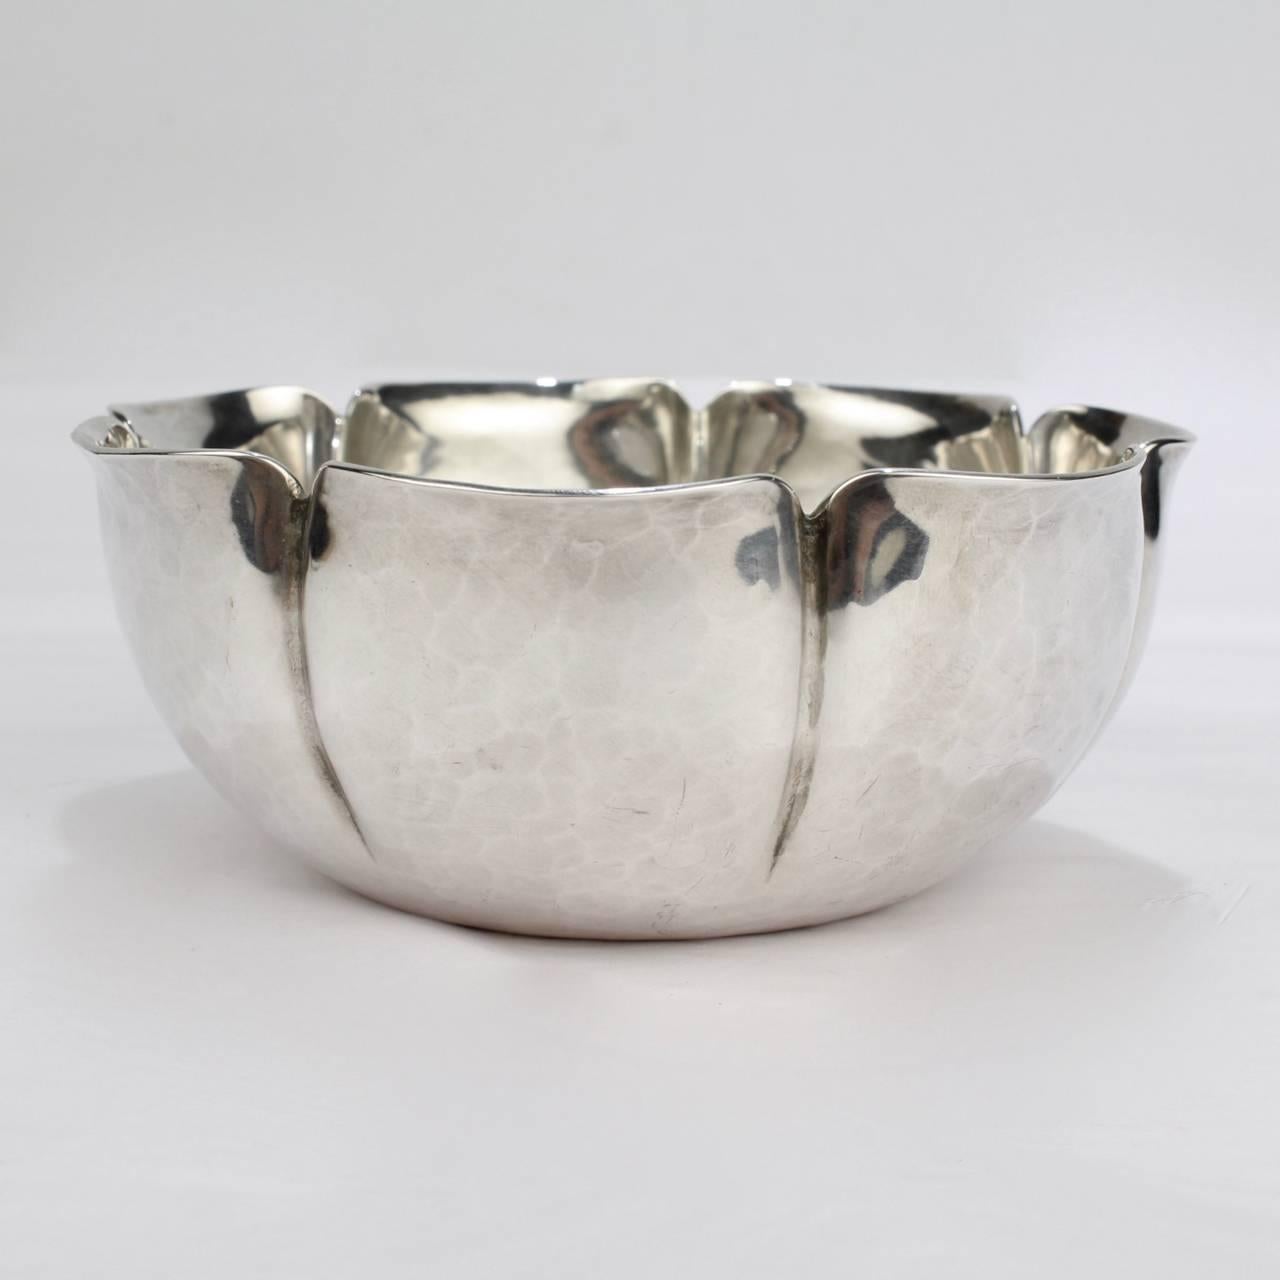 A good, heavy gauge American Arts & Crafts sterling silver bowl.

In a stylized, lobed floral form.

Handmade by Joel F Hewes. Hewes was active in Titusville, New Jersey in the first half of the 20th century. 

Base stamped: HANDMADE / JOEL F